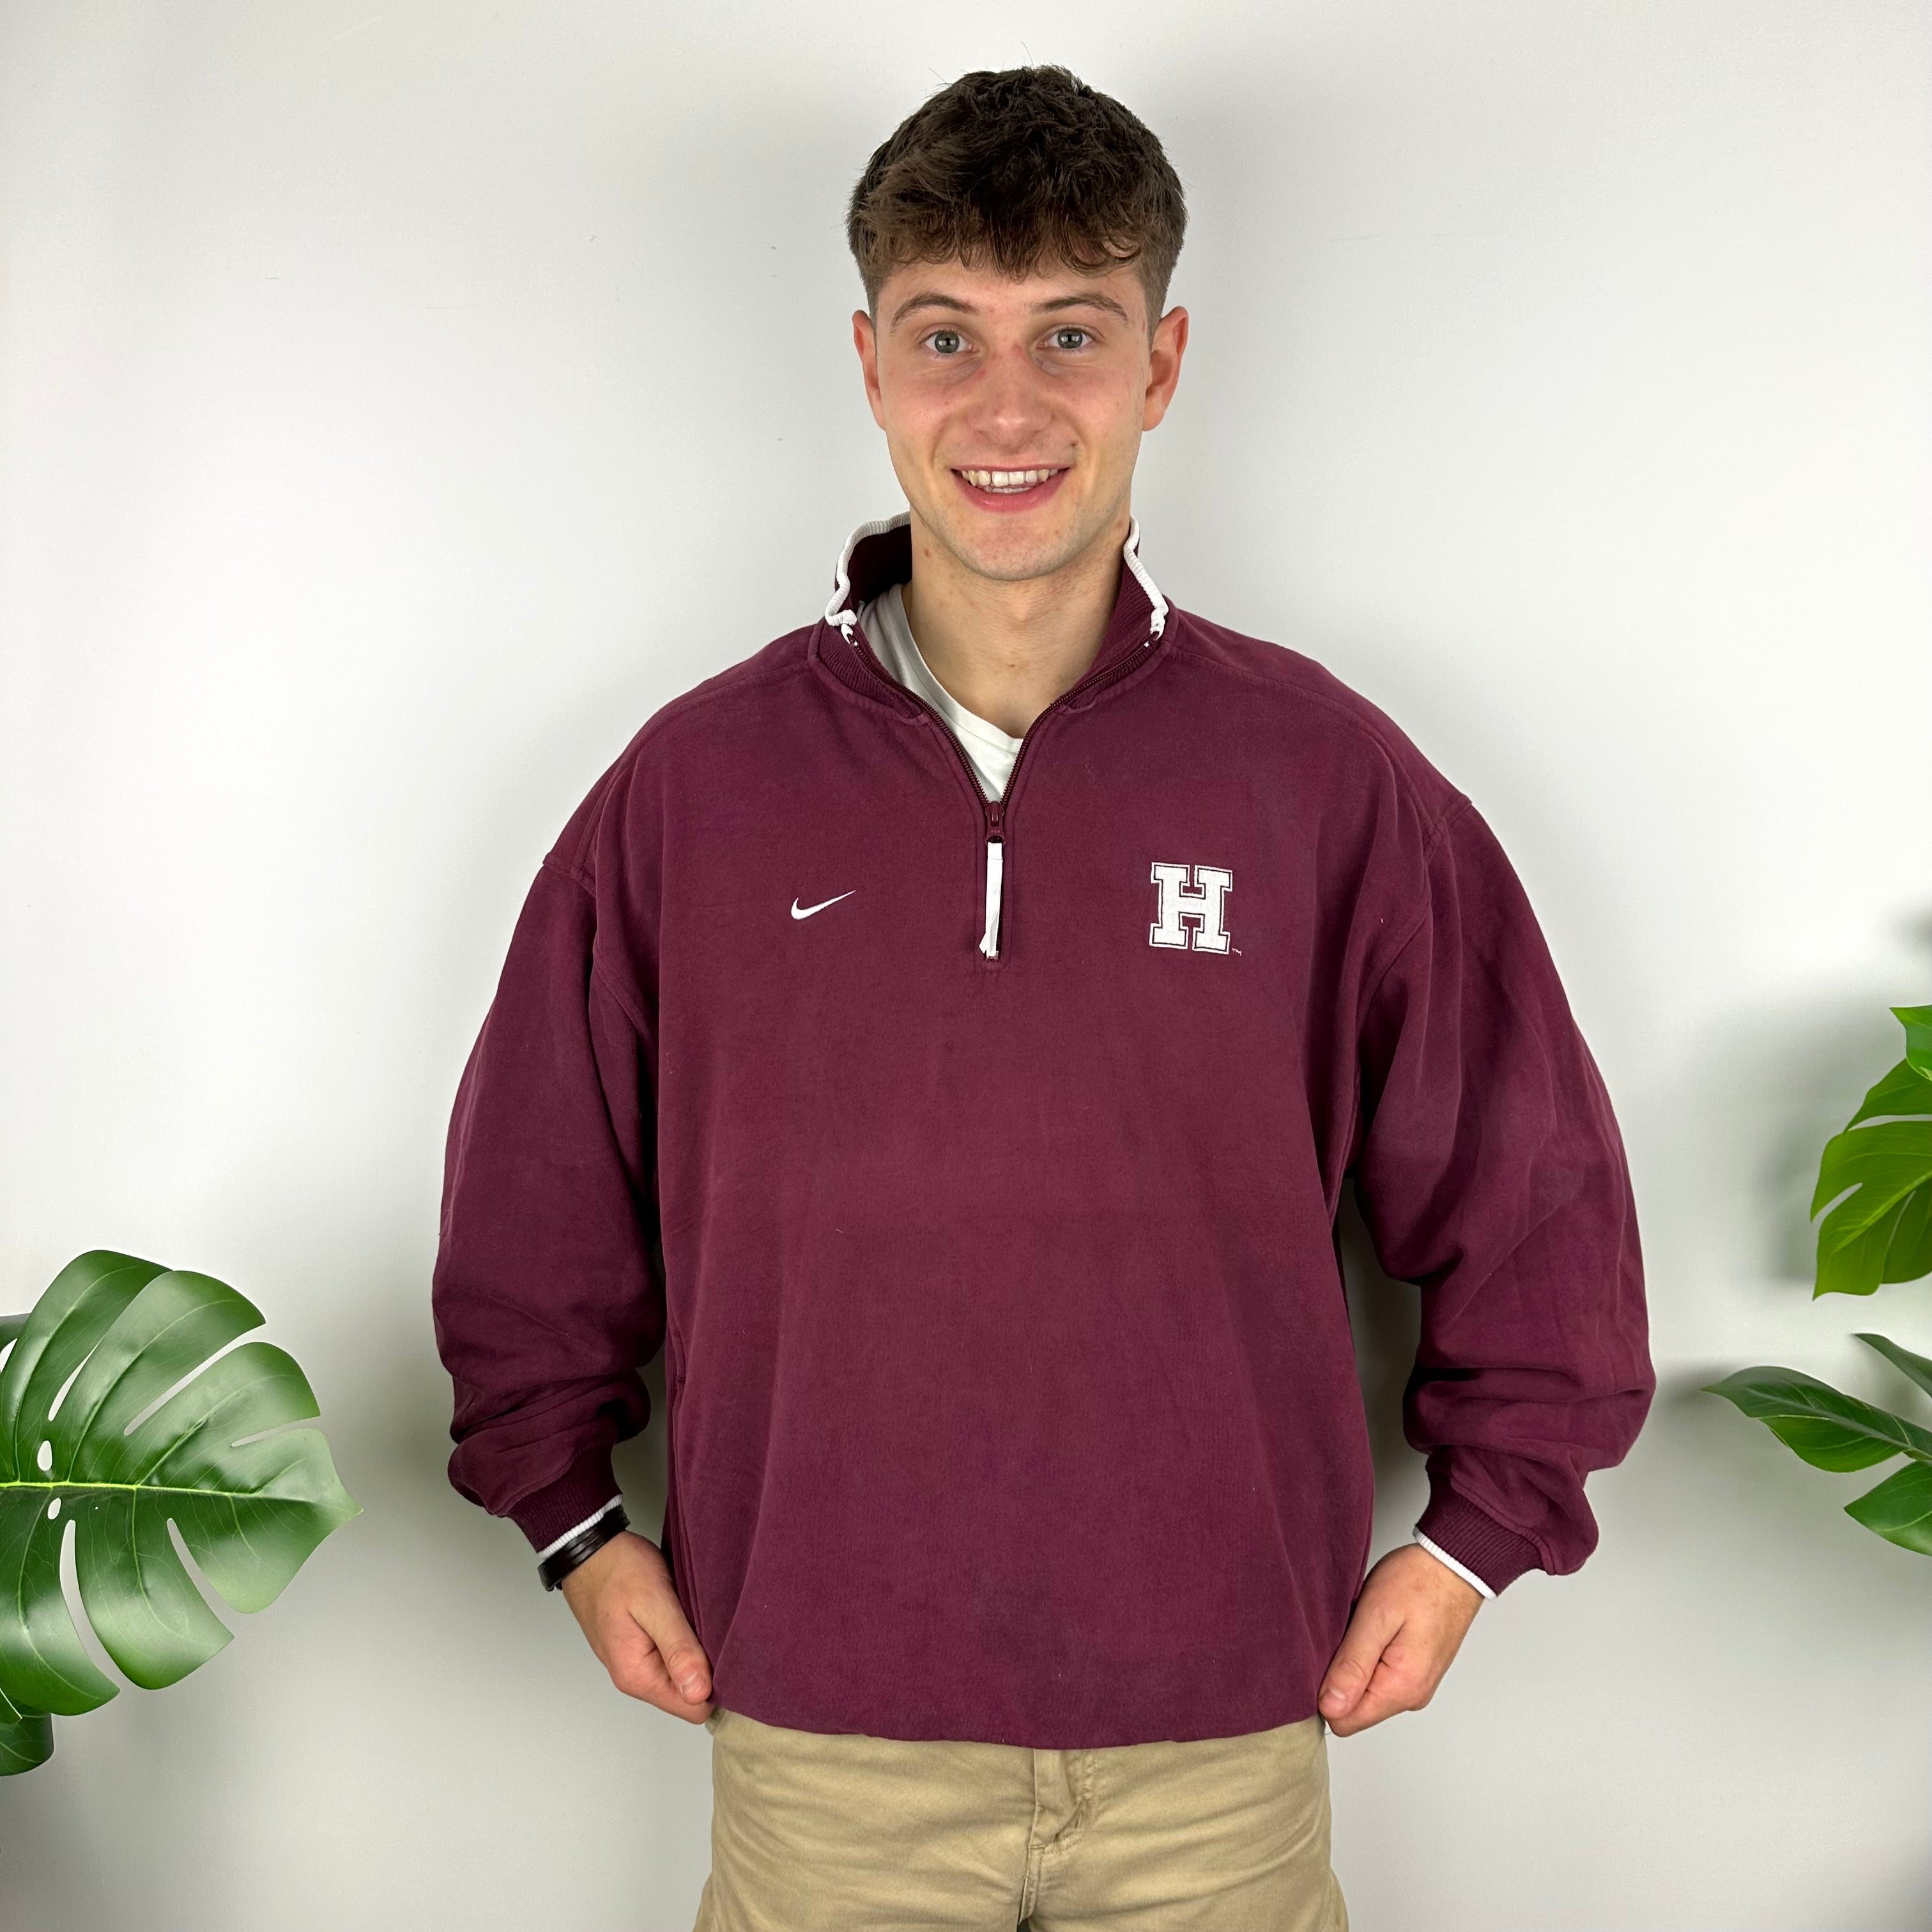 Nike Maroon Harvard Embroidered Spell Out Quarter Zip Sweatshirt (L)